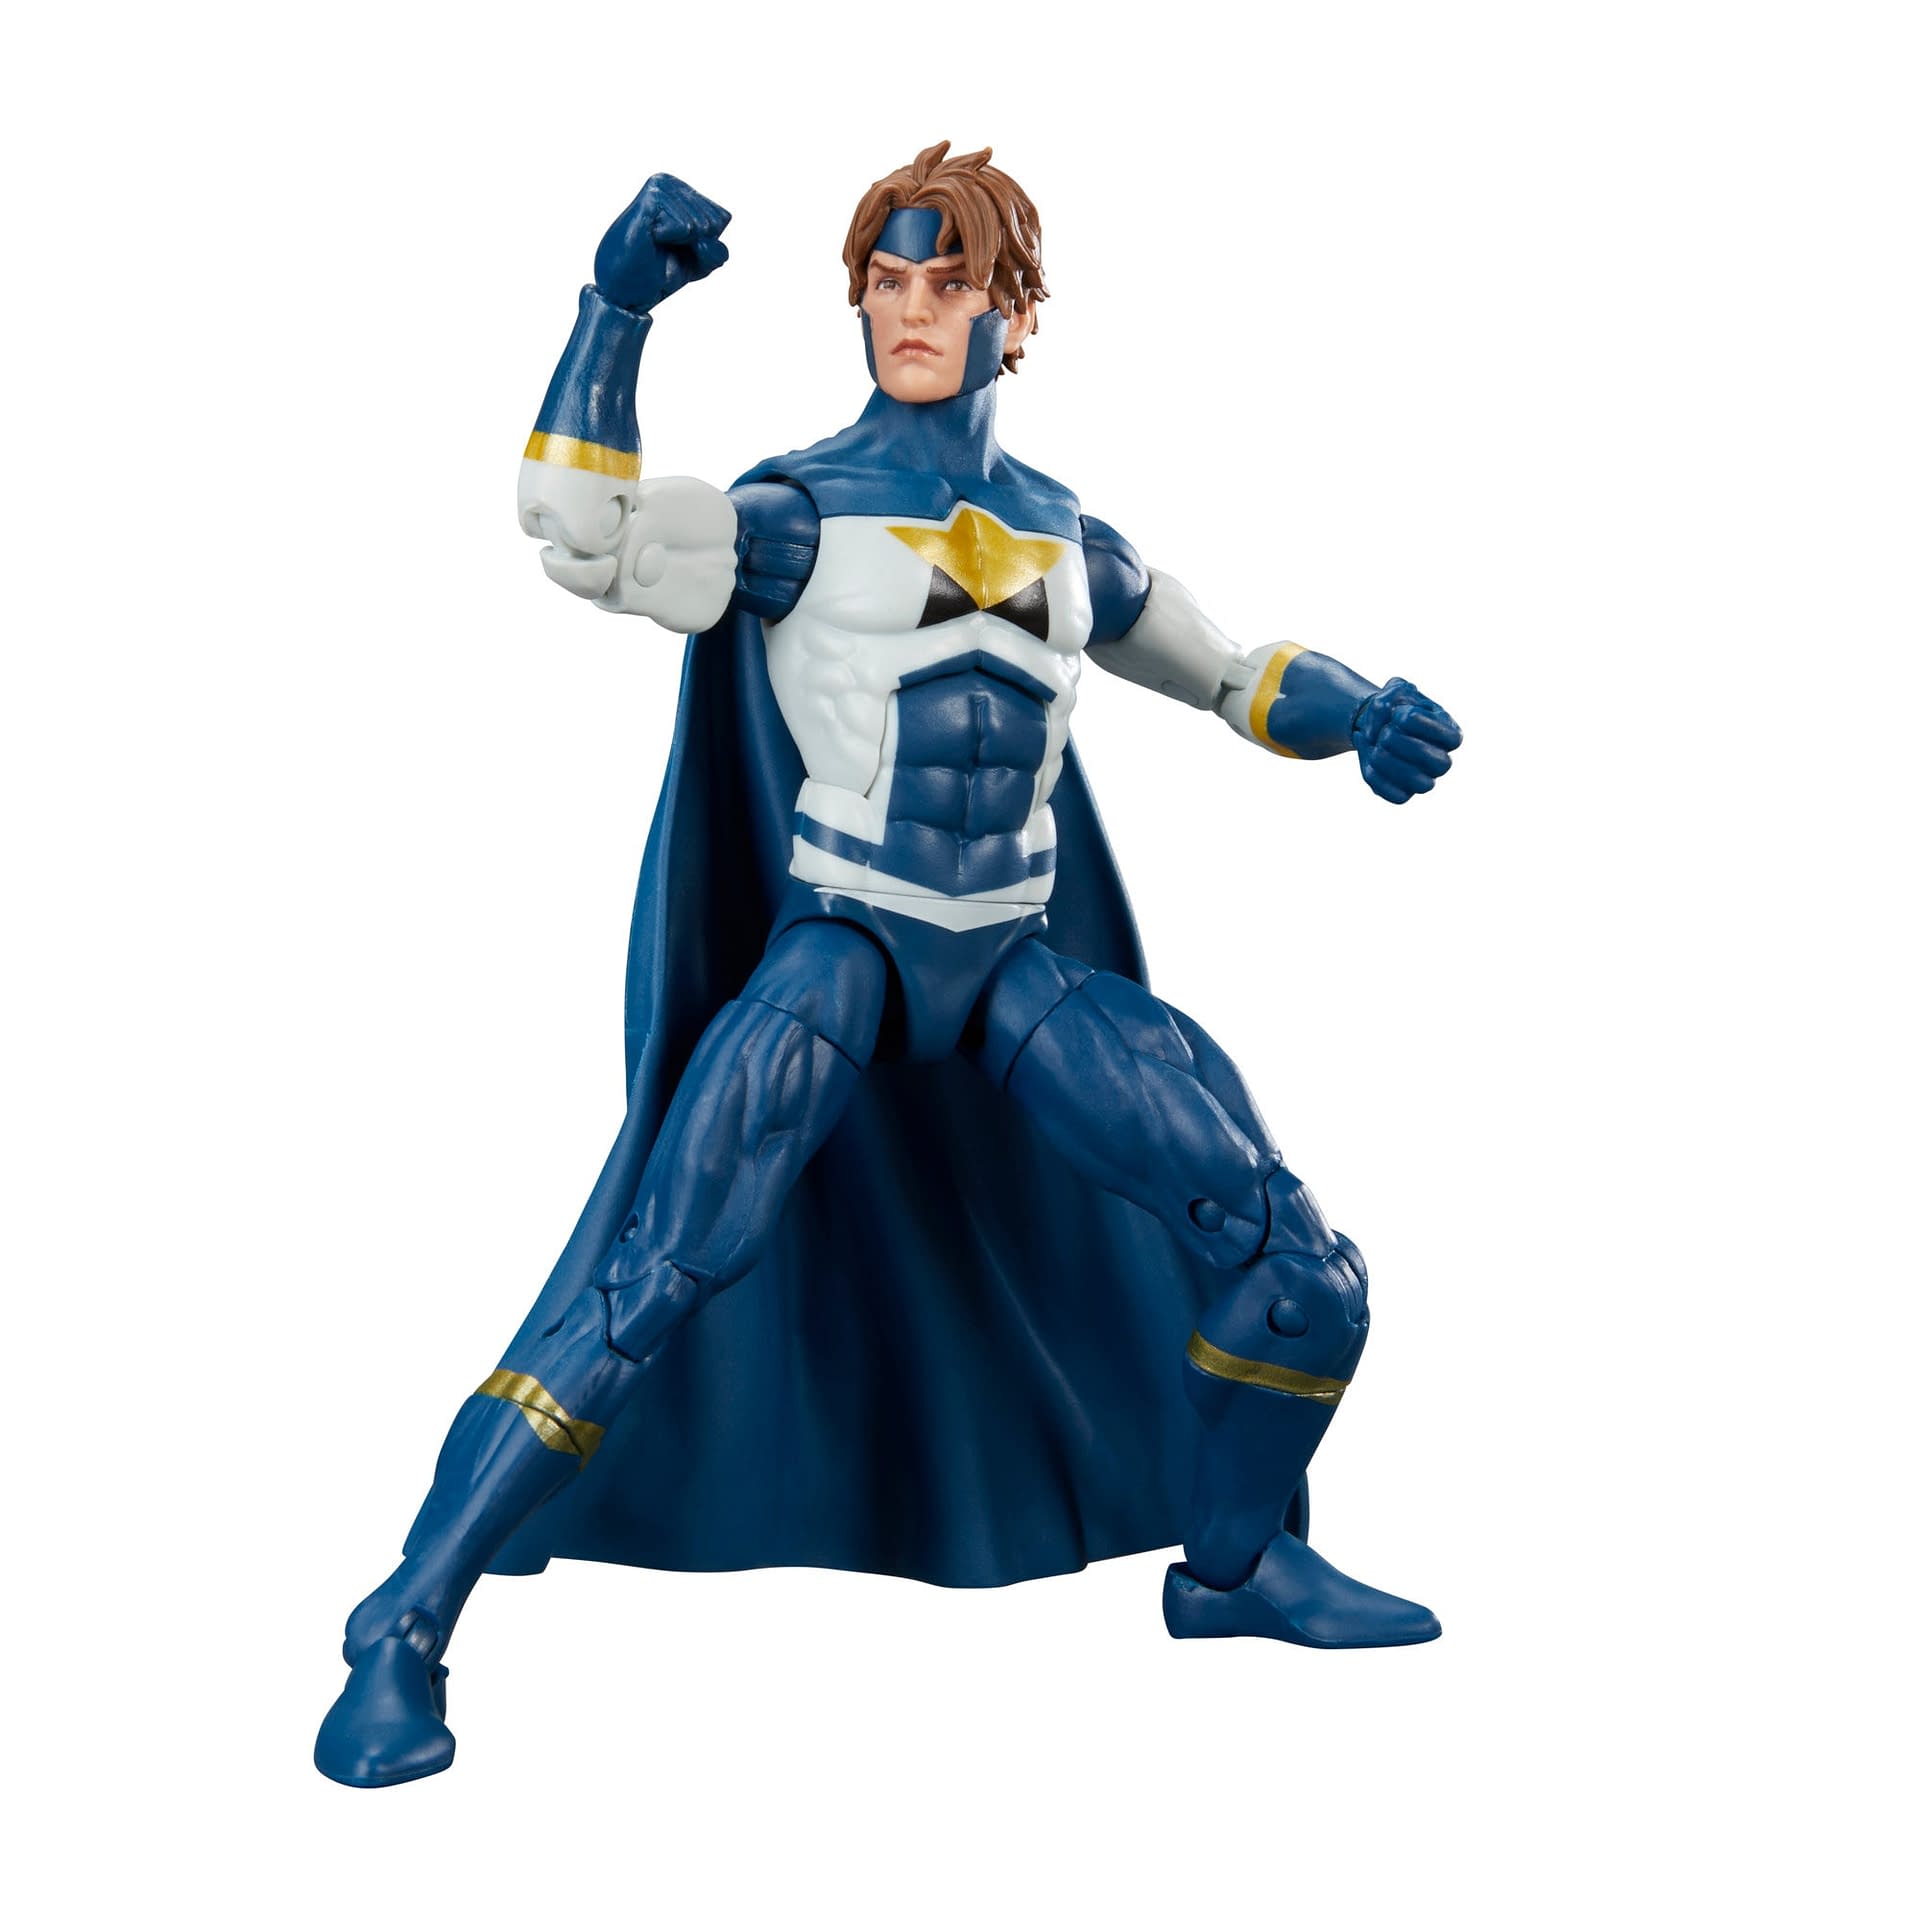 Hasbro Brings New Warriors Leader Justice to Marvel Legends 